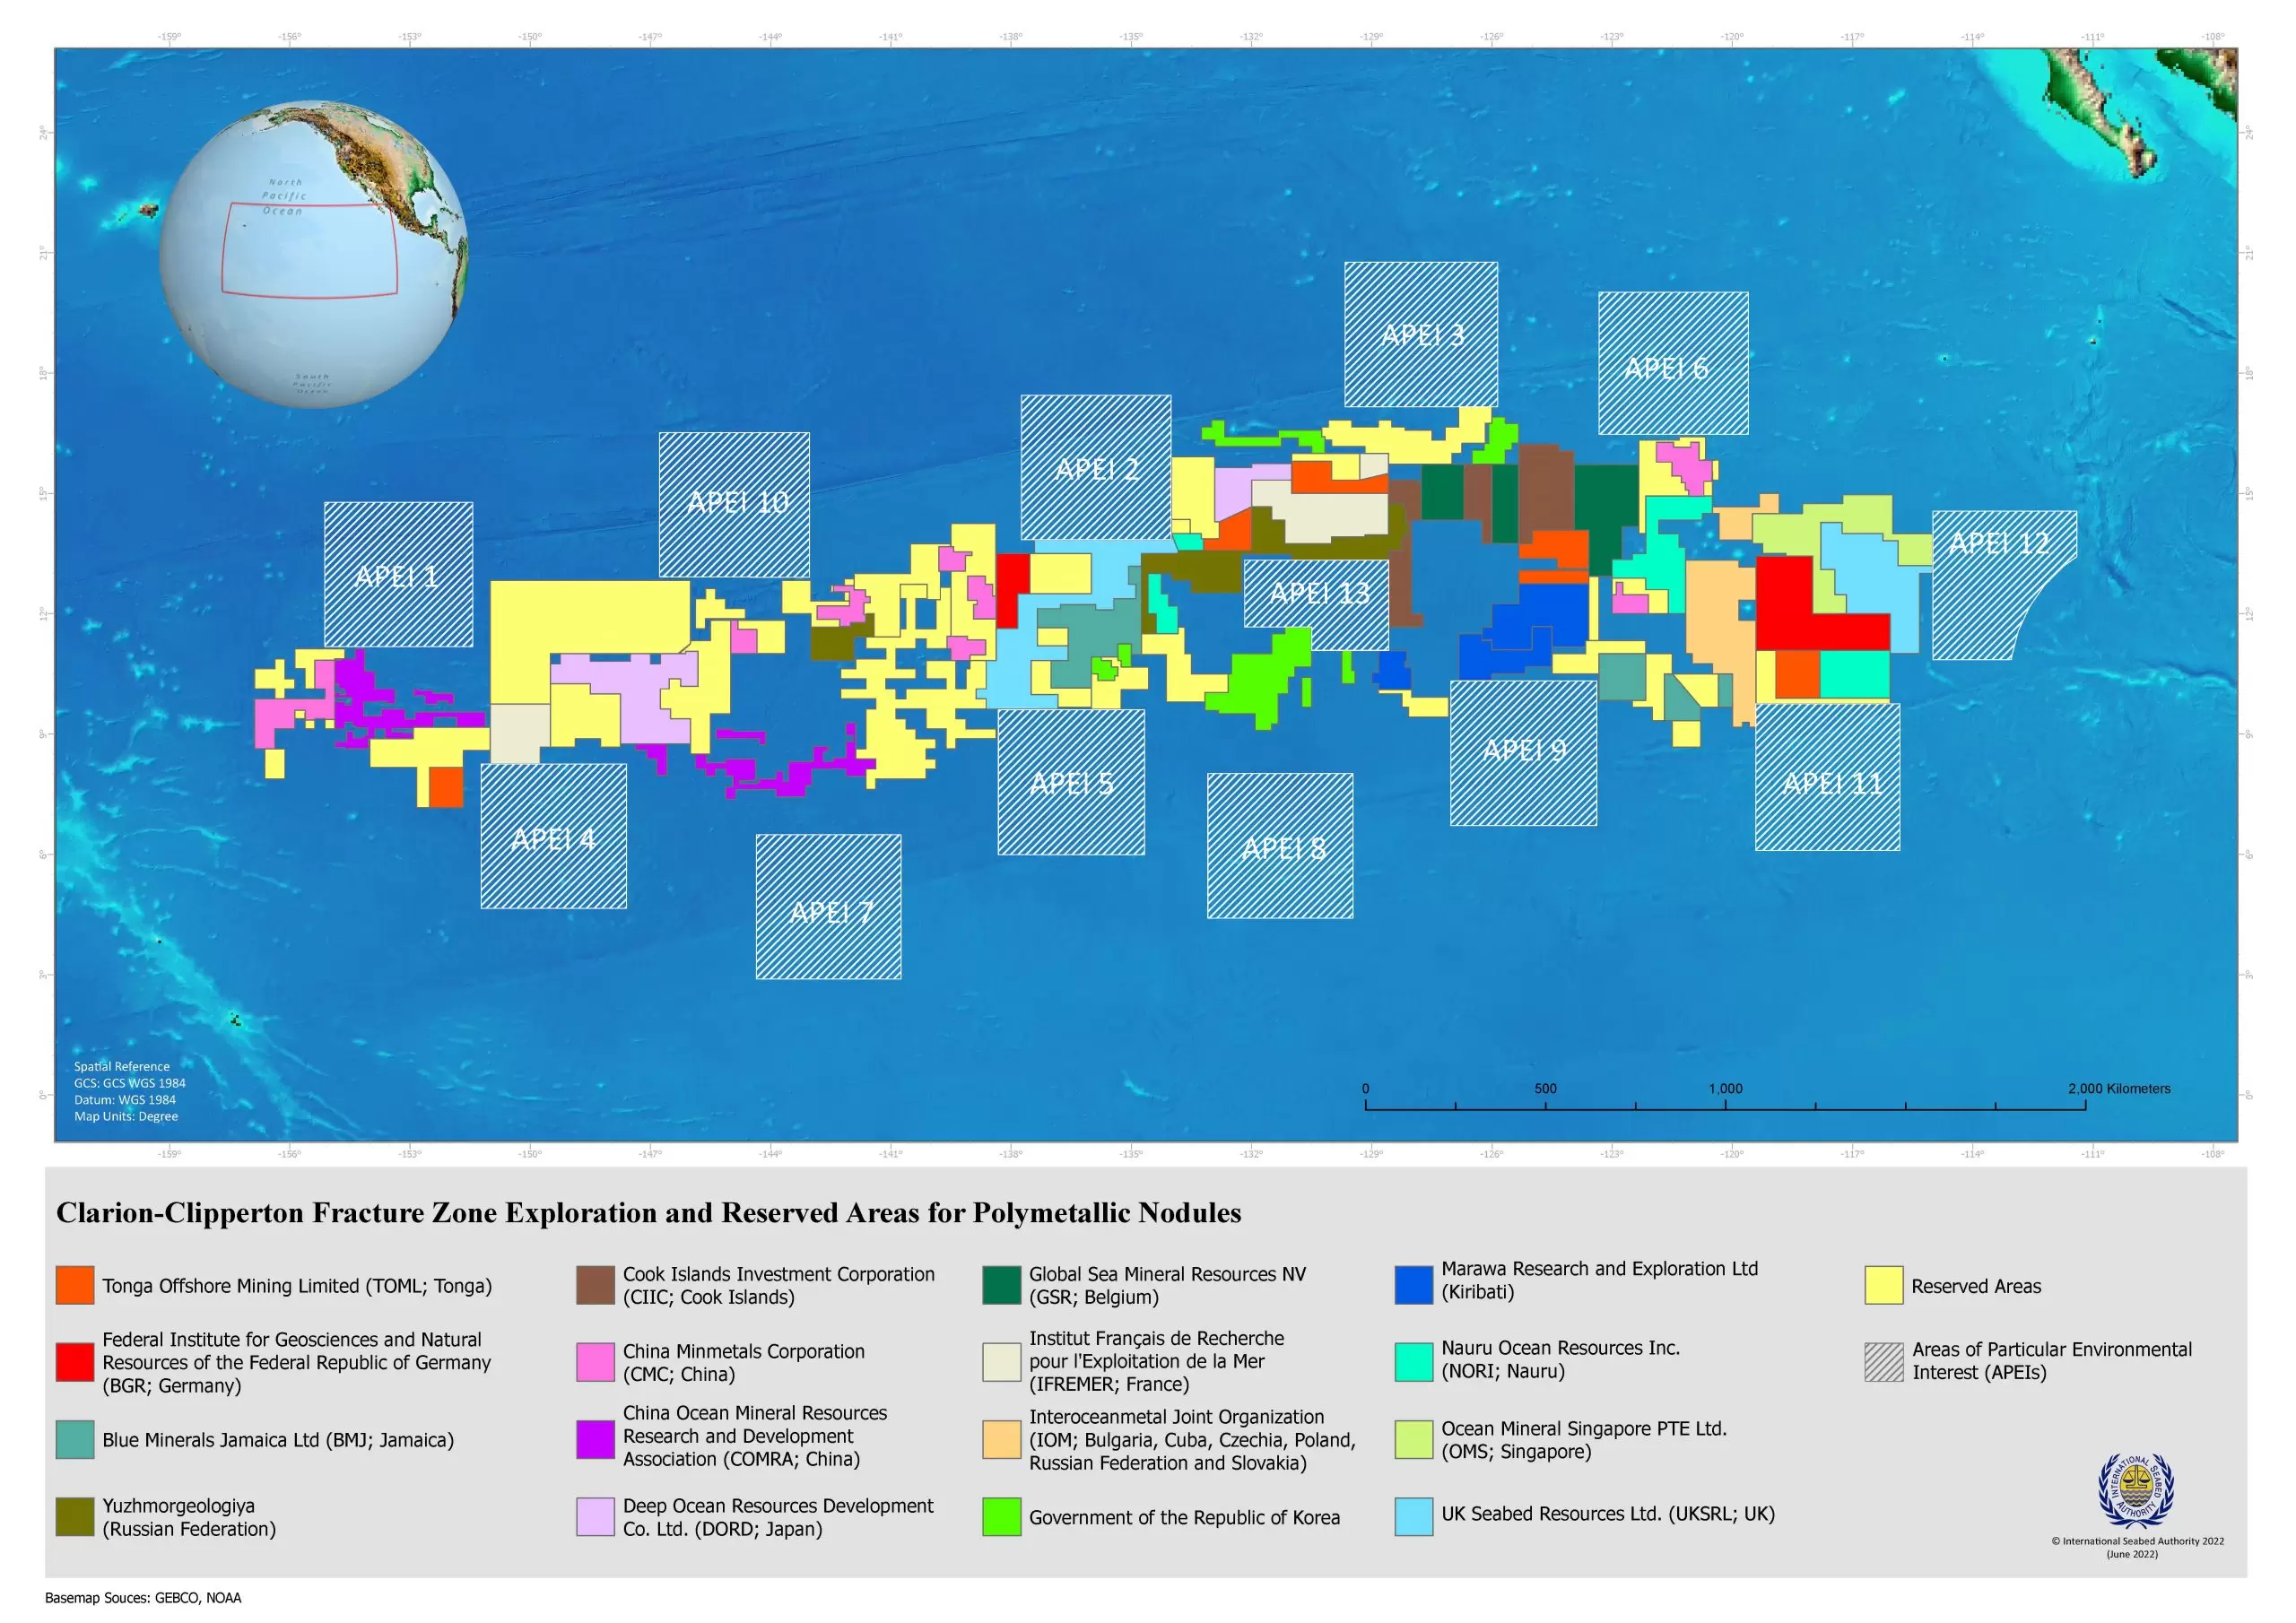 Map of the Clarion-Clipperton Zone, showing subsea mineral exploration licenses issued